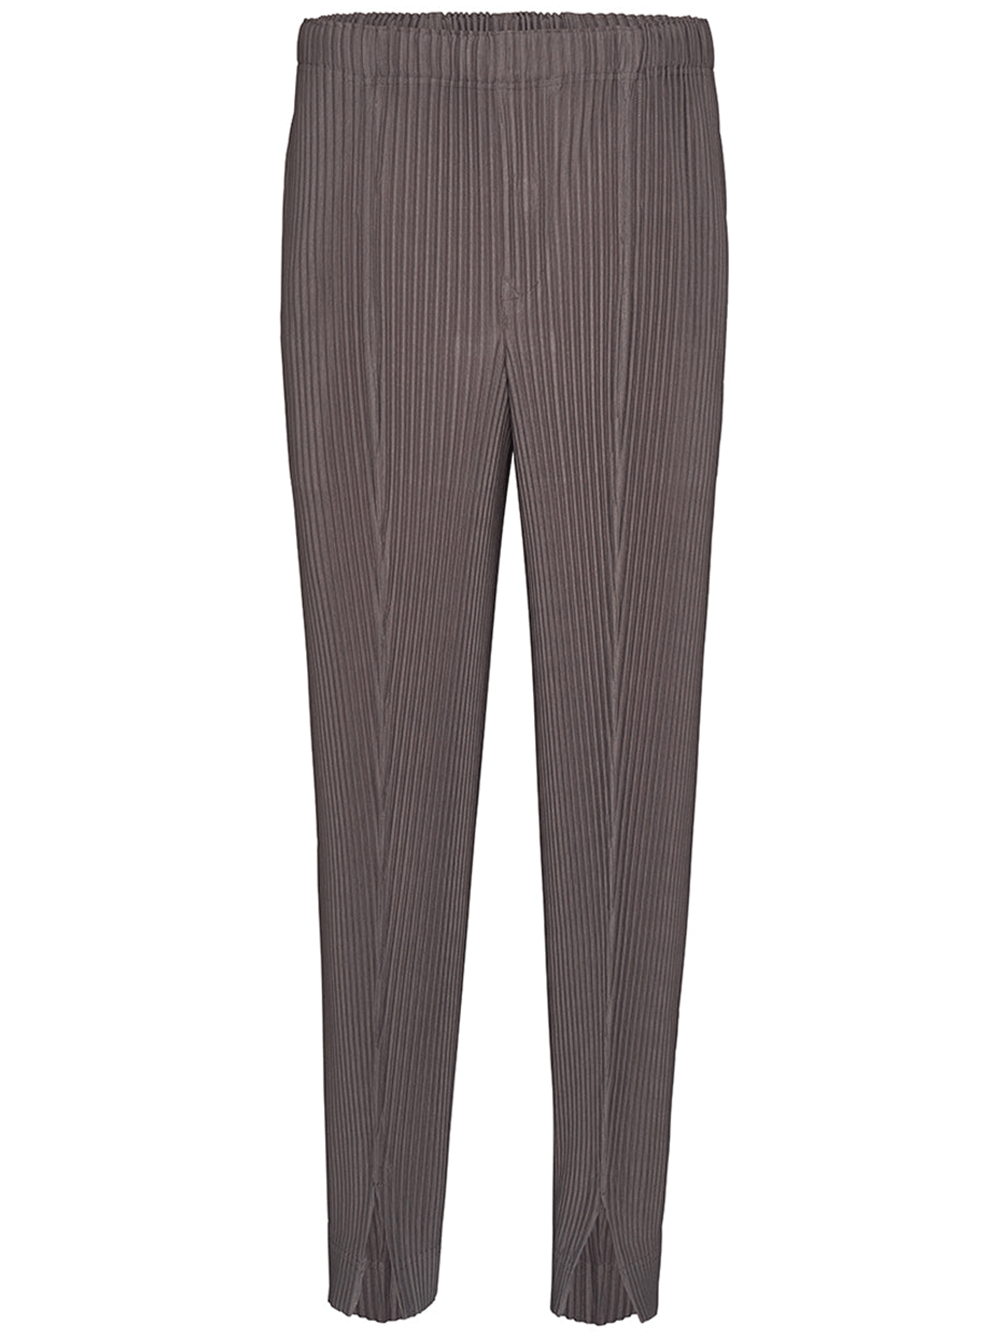 HOMME-PLISSE-ISSEY-MIYAKE-MONTHLY-COLORS-NOVEMBER-Pants-Bronze-Gray-1